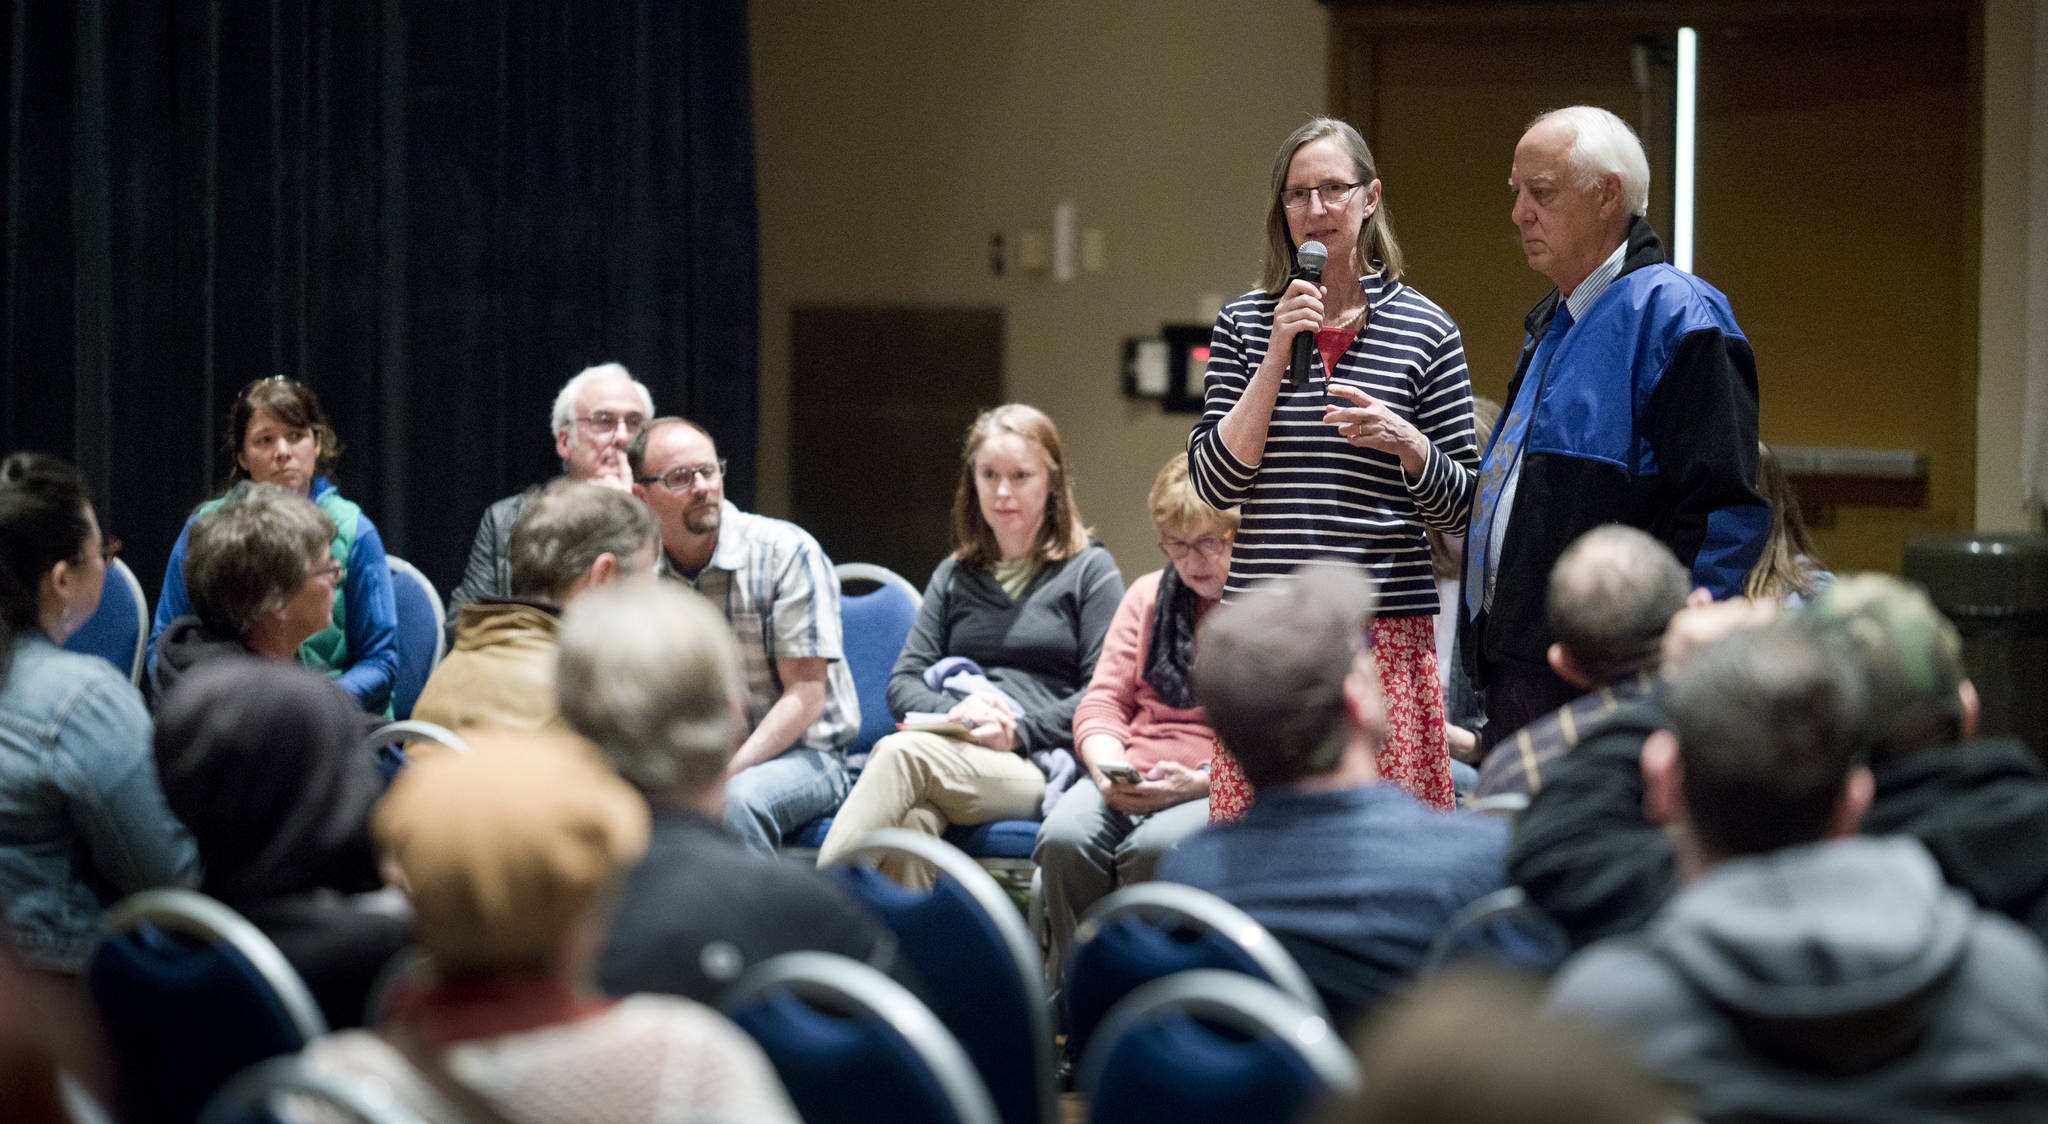 Amy Skilbred, Executive Director of the Juneau Community Foundation, and Mayor Ken Koelsch speak about fundraising for the rebuilding of Project Playground at Twin Lakes during a meeting at Centennial Hall on Tuesday, May 2, 2017. (Michael Penn | Juneau Empire)